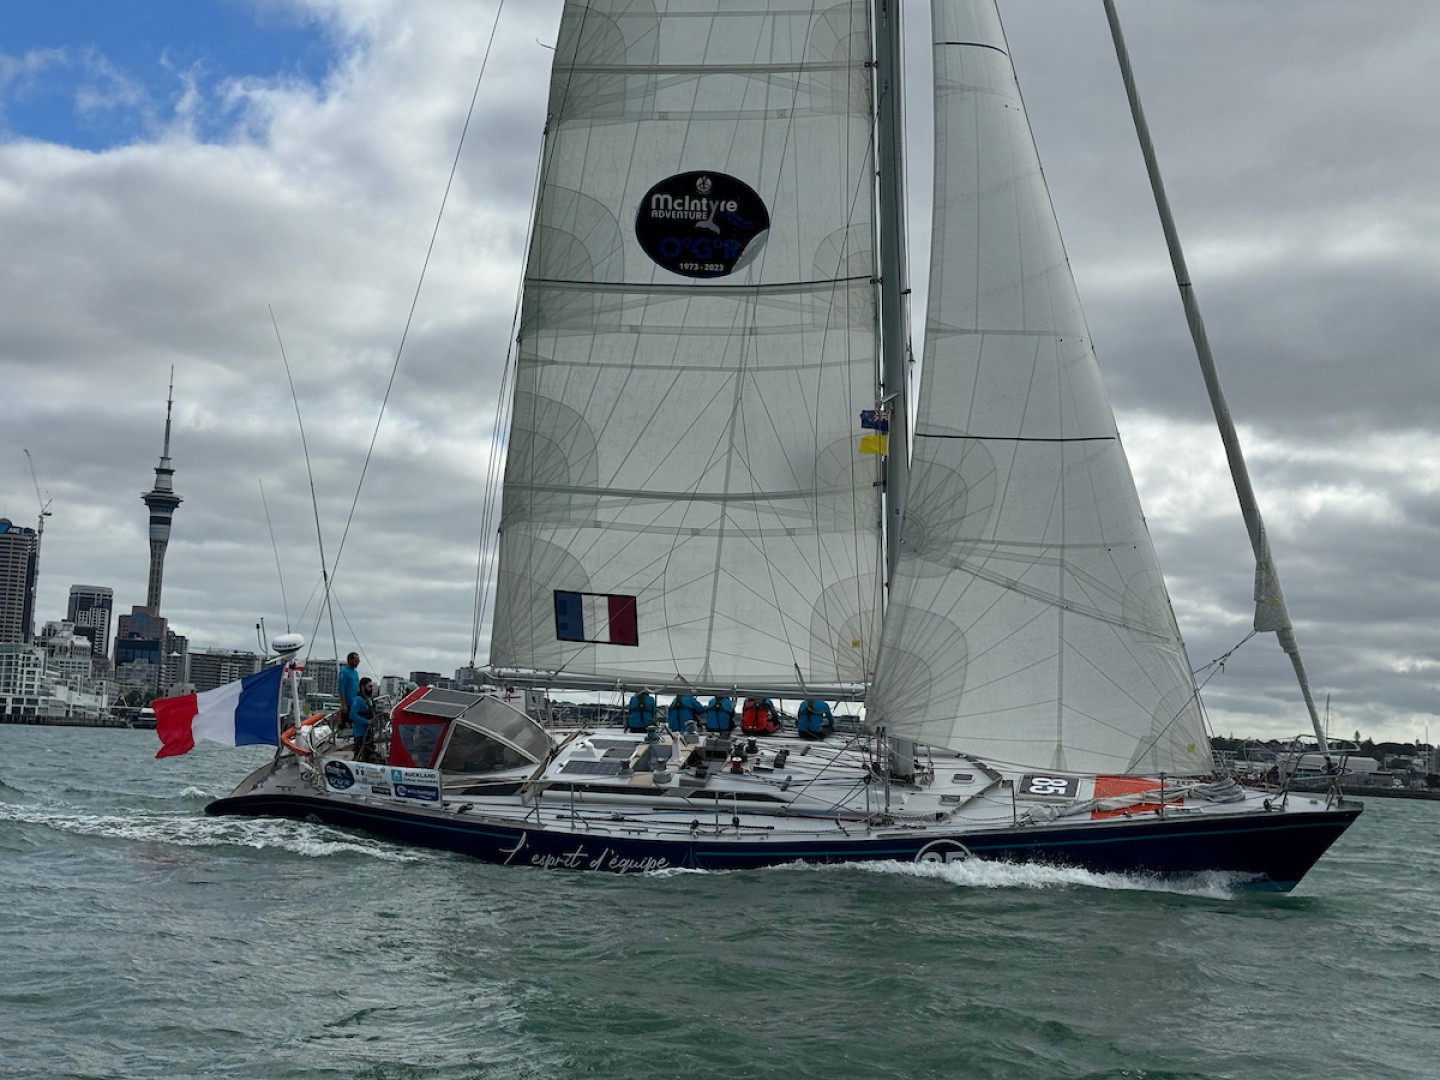 L'esprit d'équipe tacking, then tacking again, and again towards the finish line - returning to Auckland water again! Credit:OGR2023/Aida Valceanu